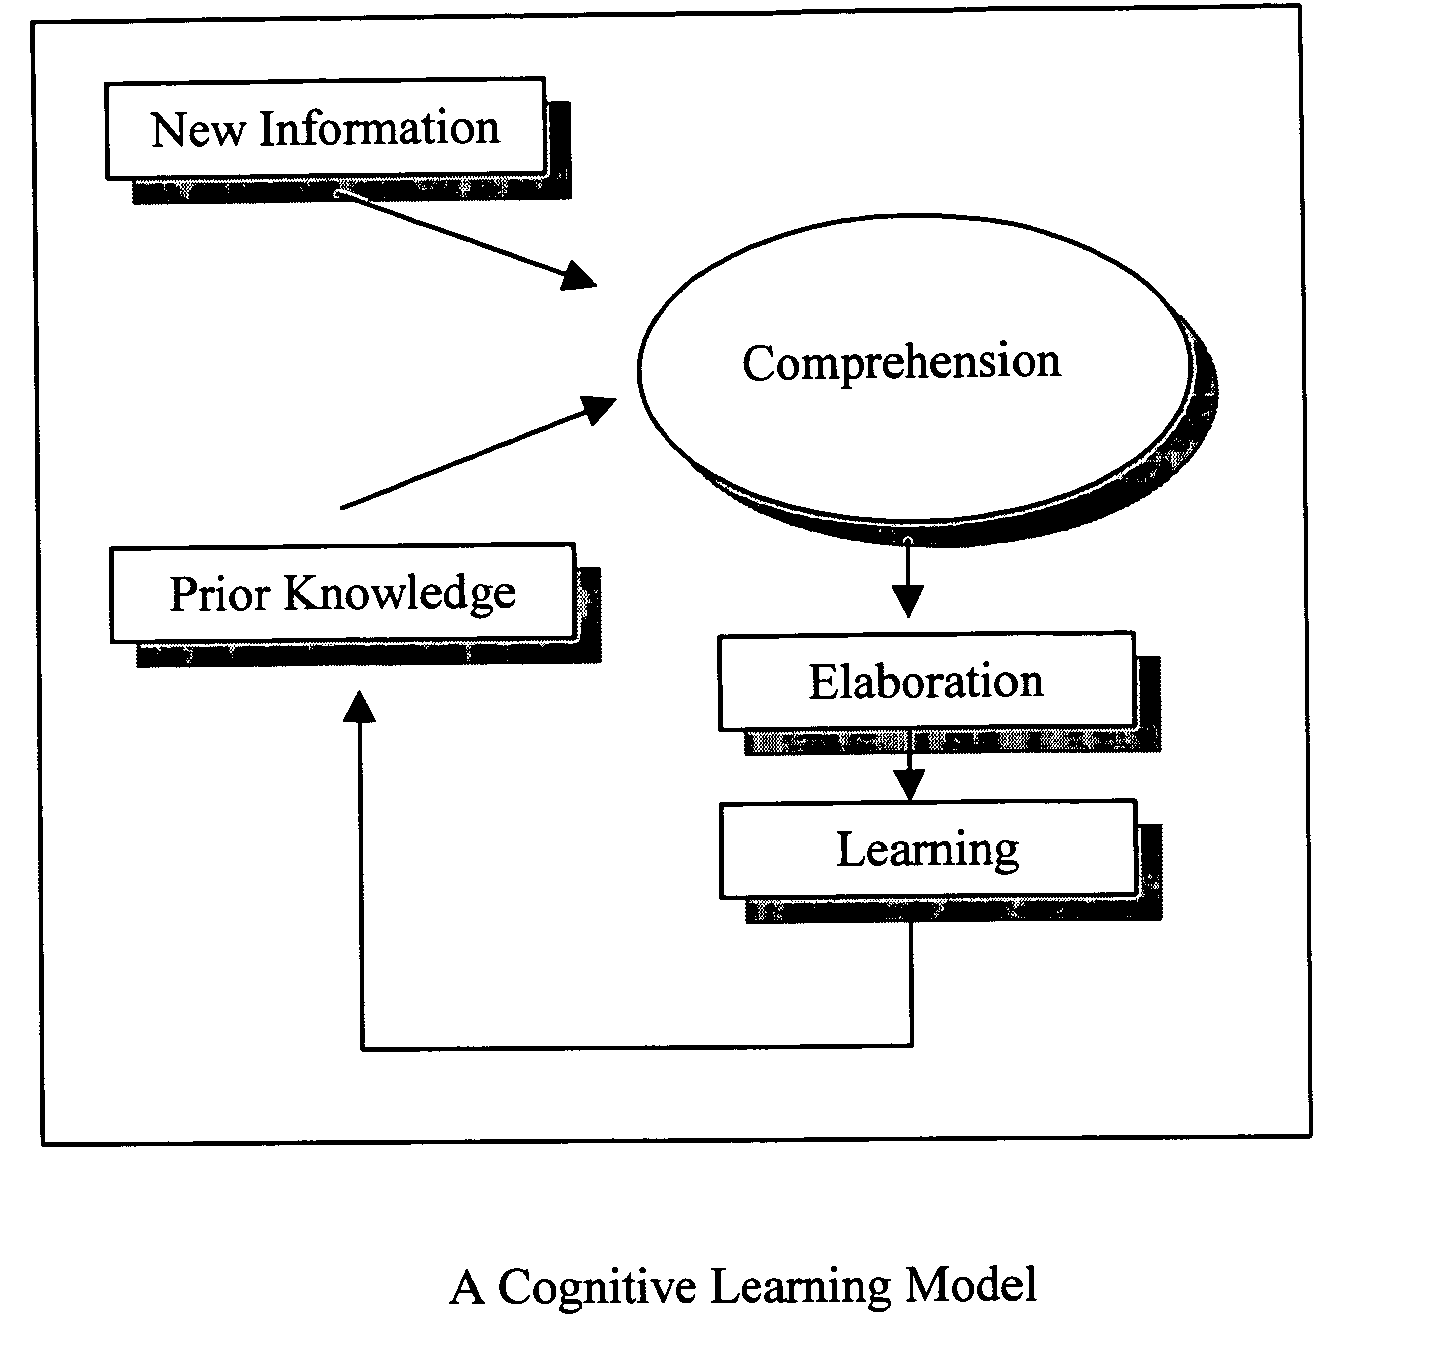 Predictive artificial intelligence and pedagogical agent modeling in the cognitive imprinting of knowledge and skill domains